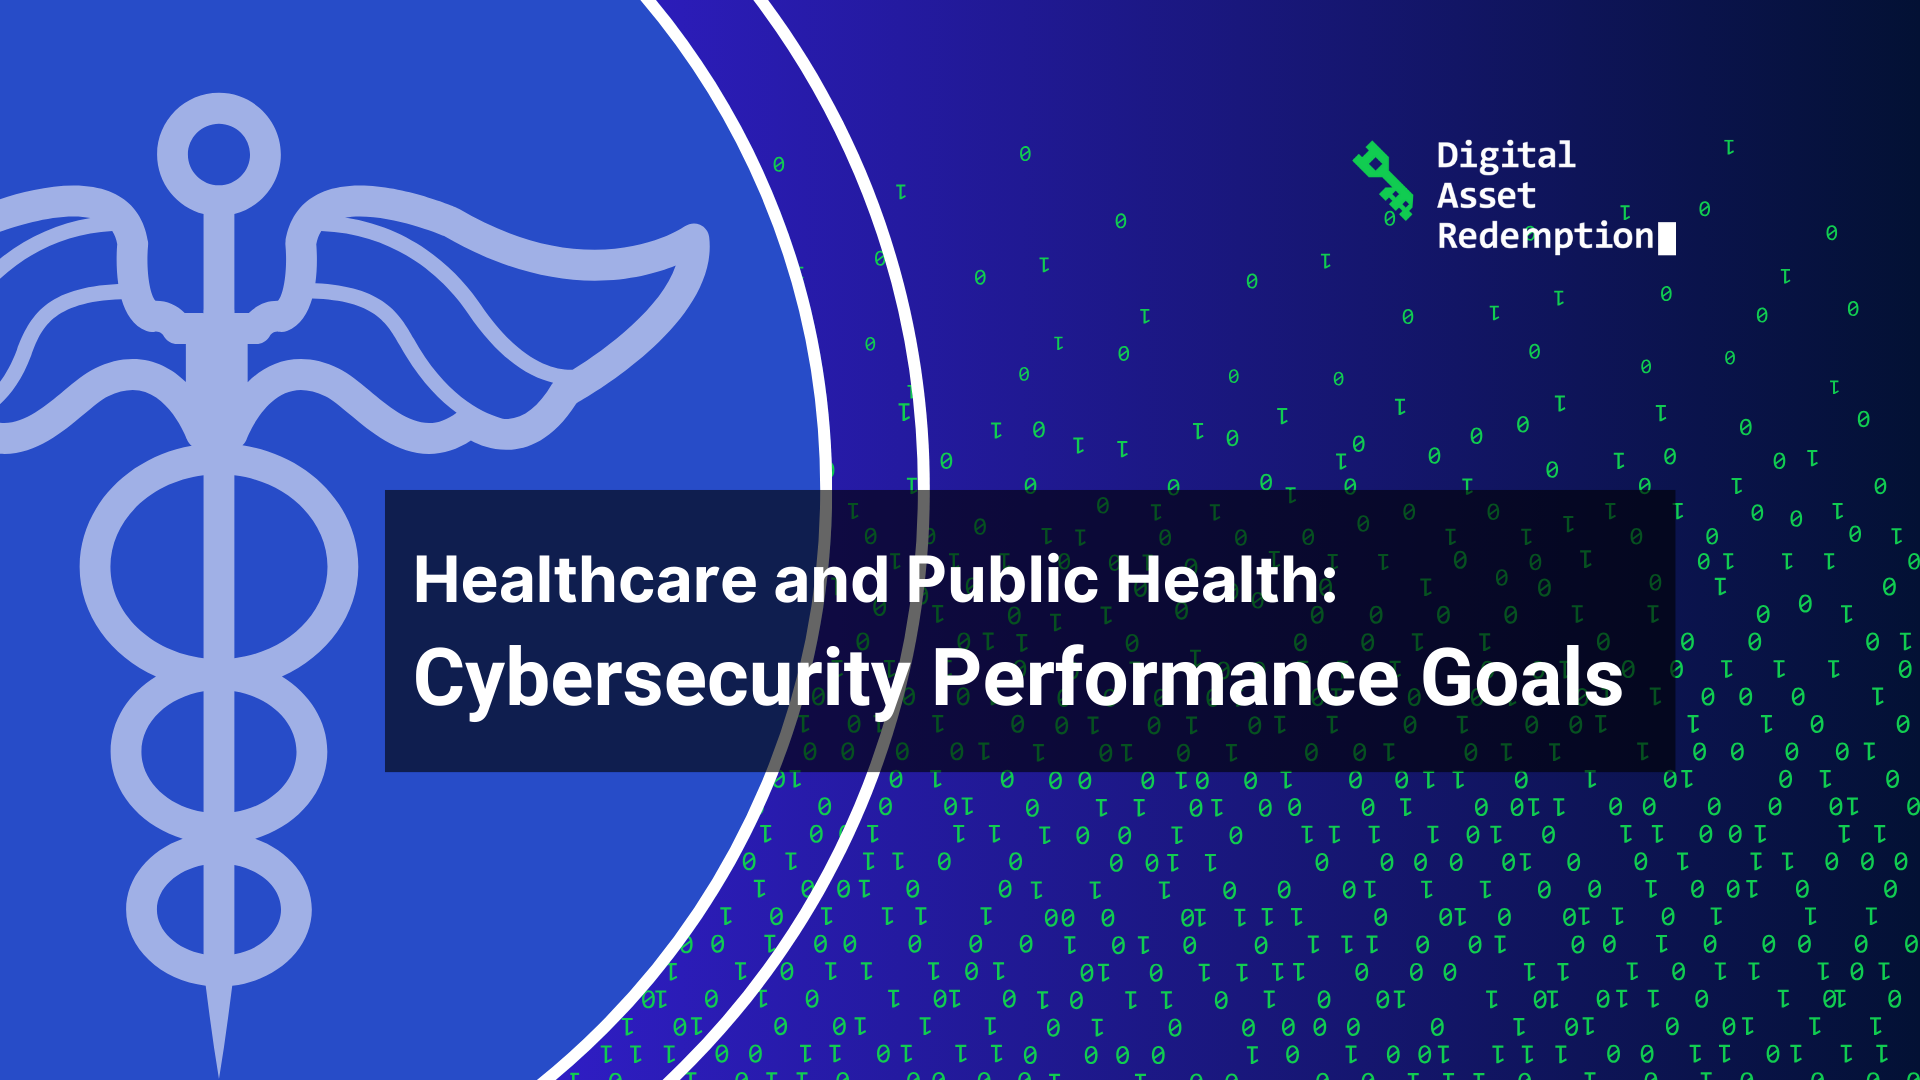 Healthcare and Public Health Cybersecurity Performance Goals